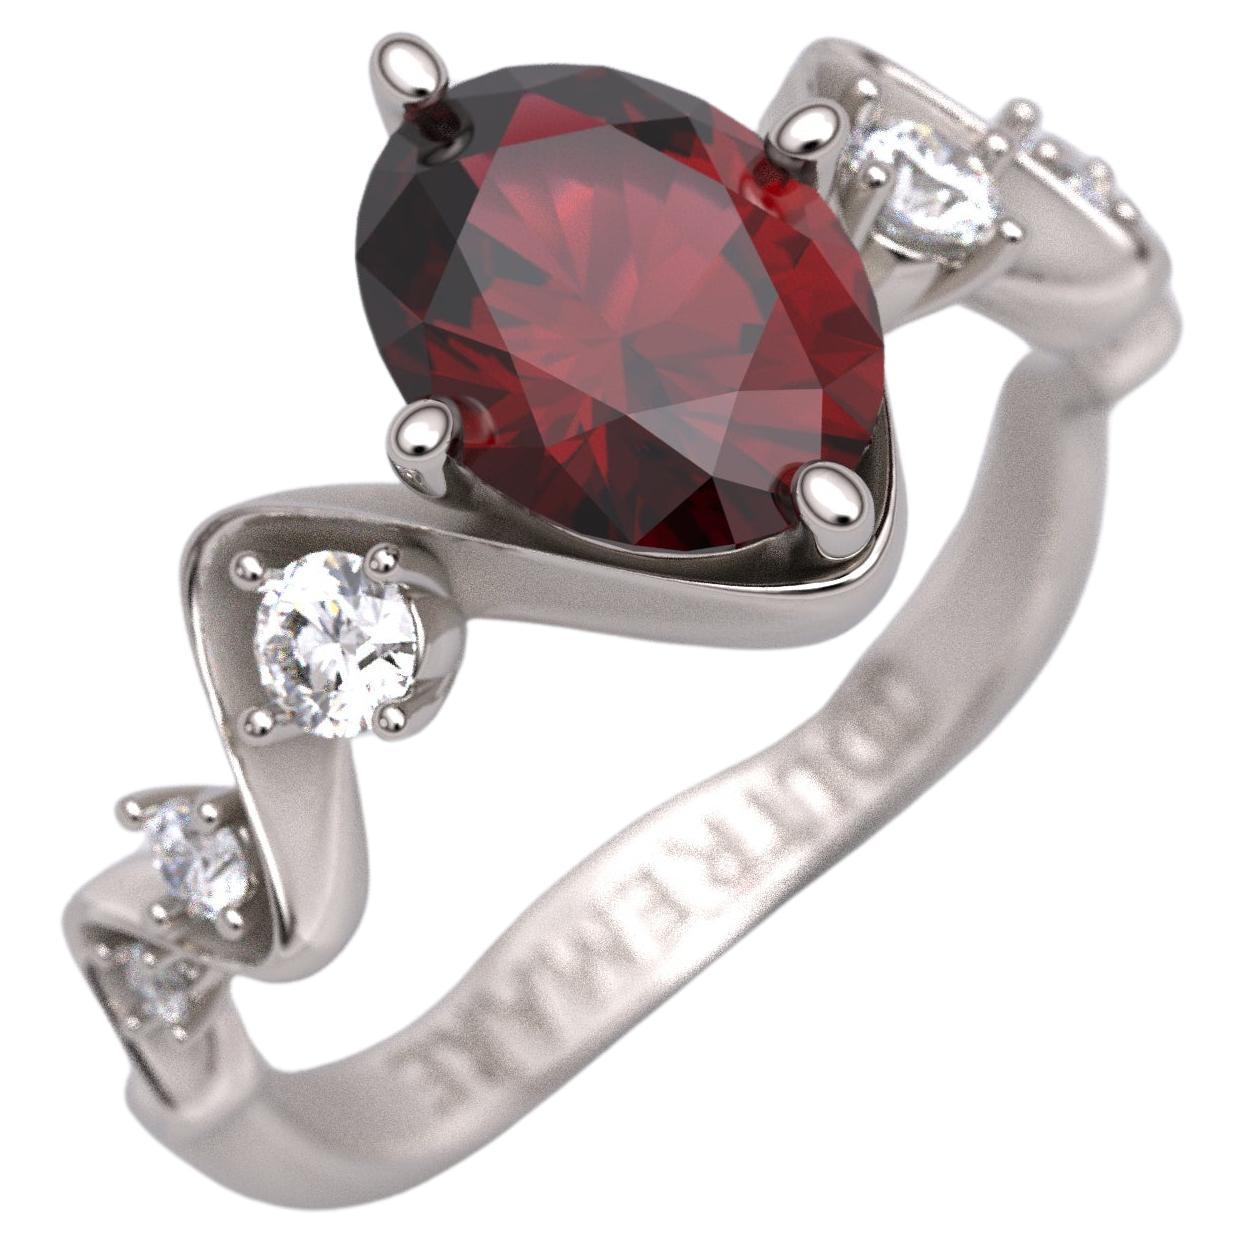 For Sale:  Garnet and Diamonds Engagement Ring Made in Italy by Oltremare Gioielli 18k Gold